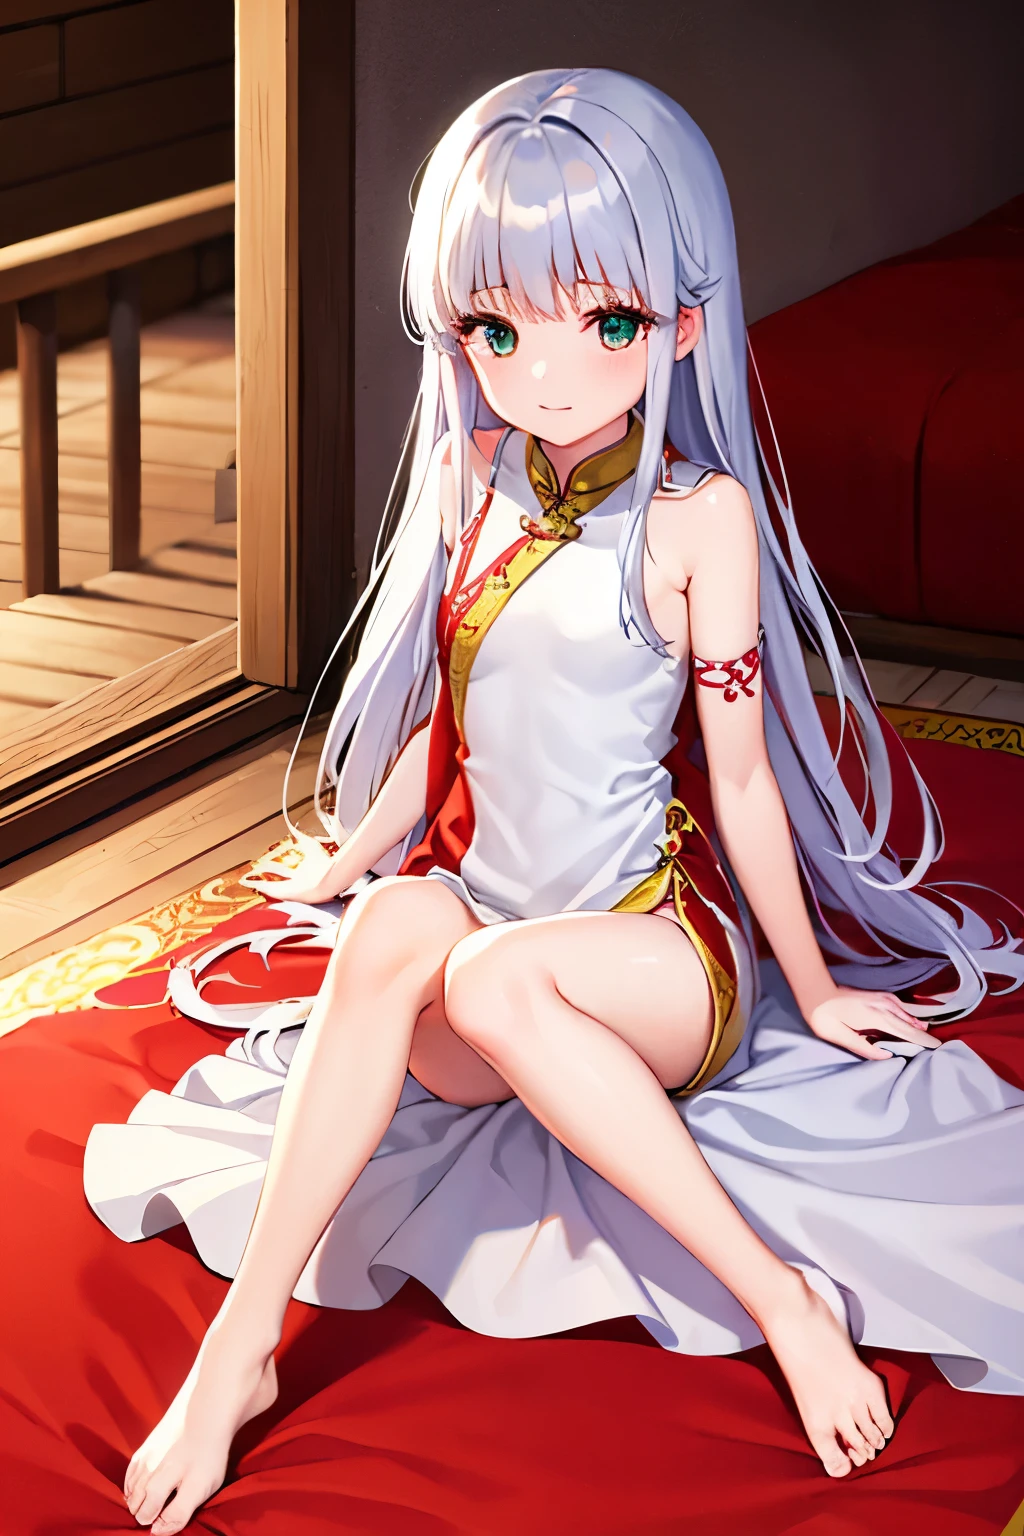 Long silver hair, green eyes, , qipao, chinese dress, red clothes, seductive eyes, smile, beautiful thighs, inside house